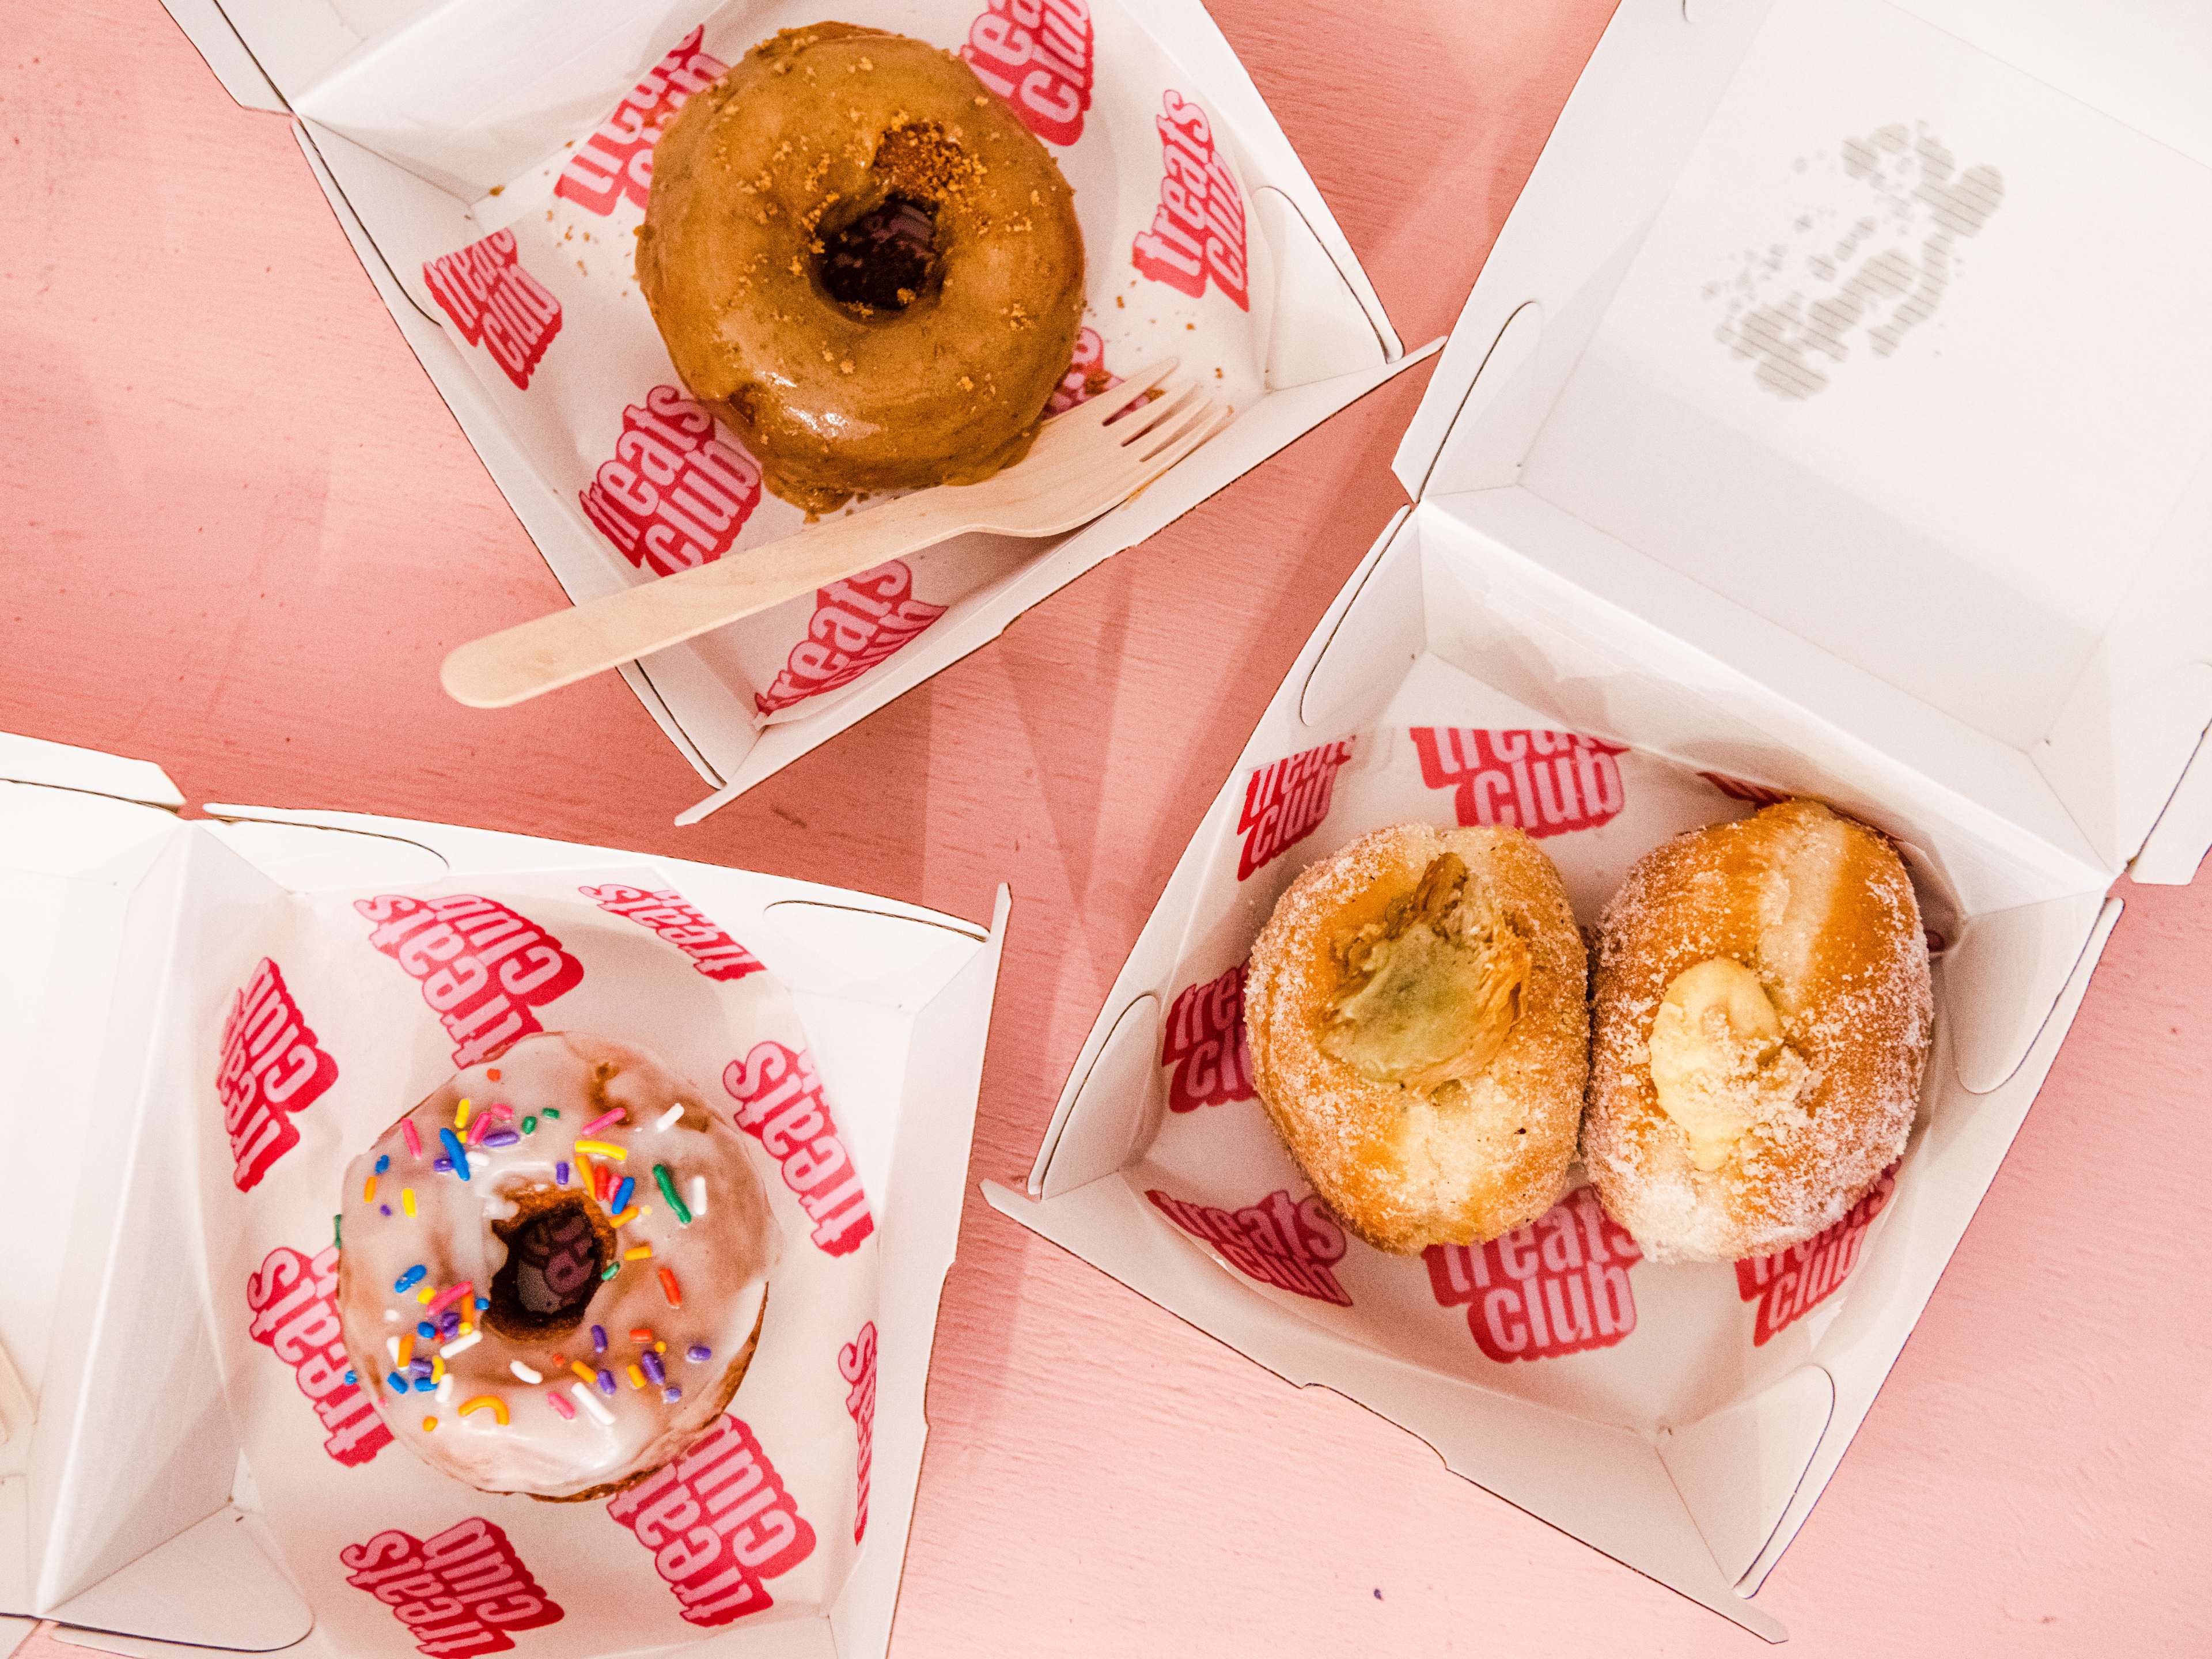 A spread of doughnuts in takeaway containers from The Treats Club.